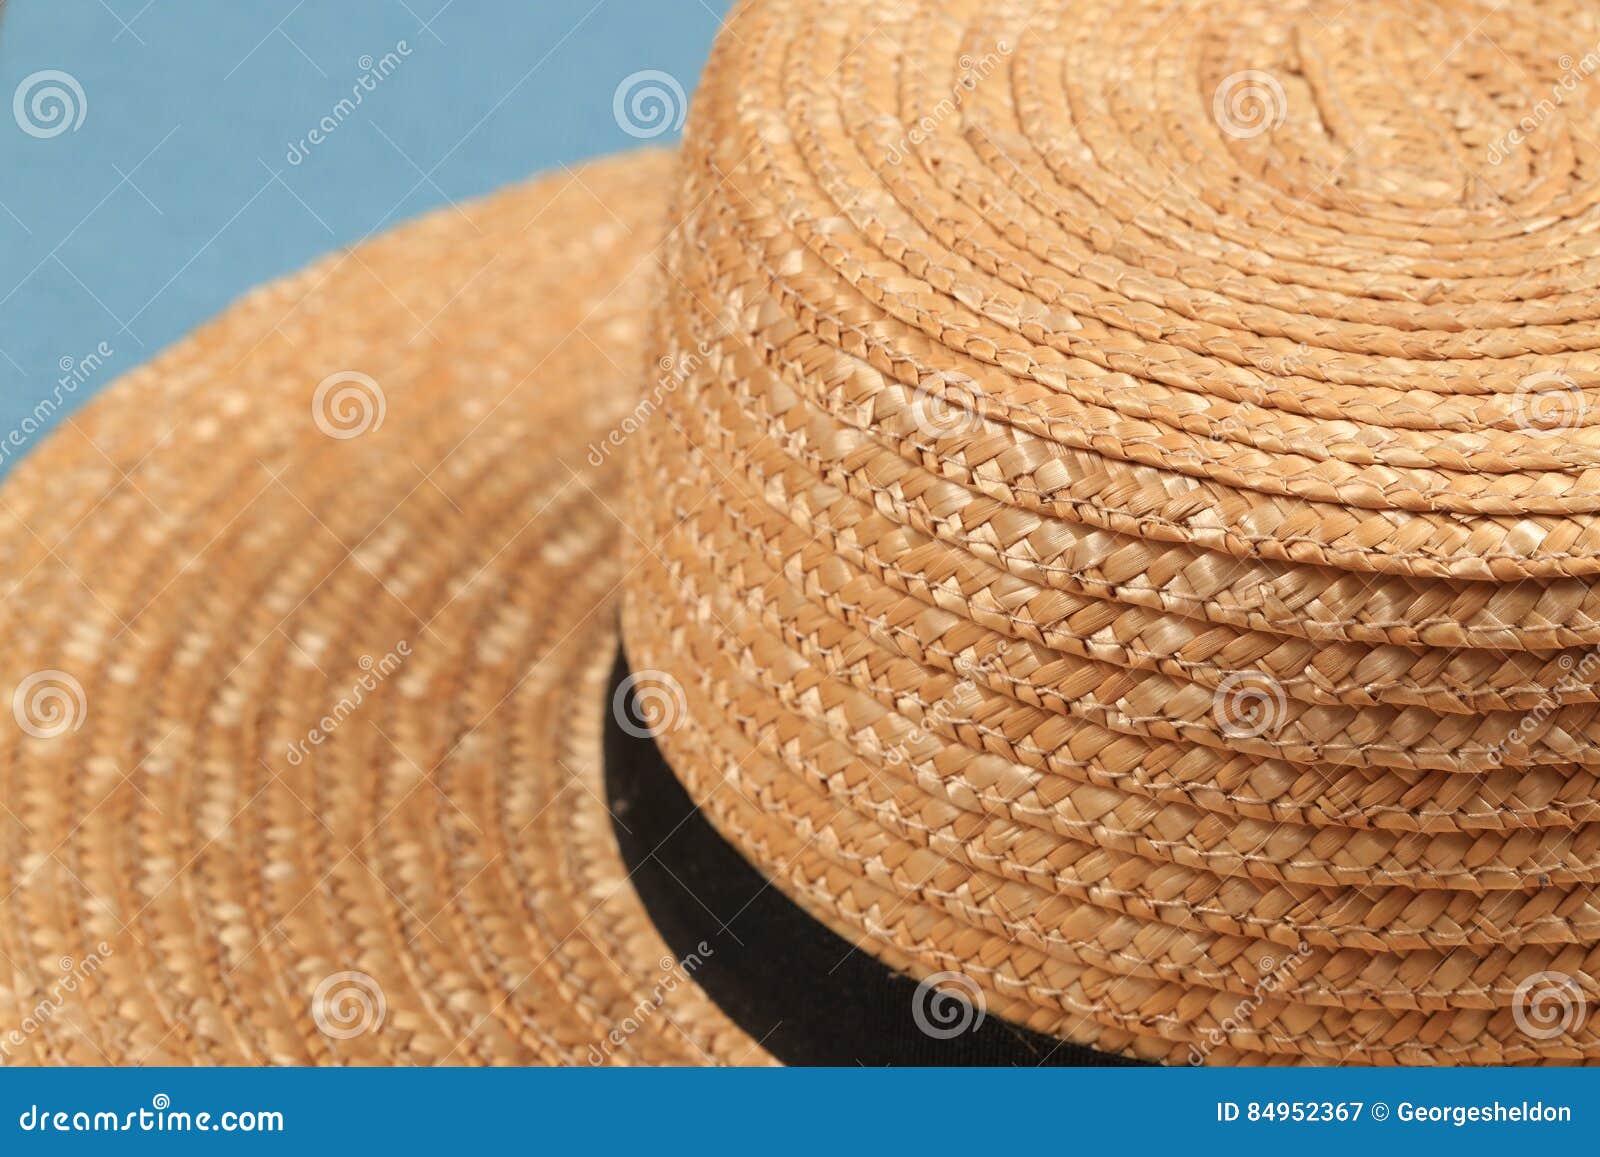 Close Up of Straw Hat stock image. Image of straw, summer - 84952367